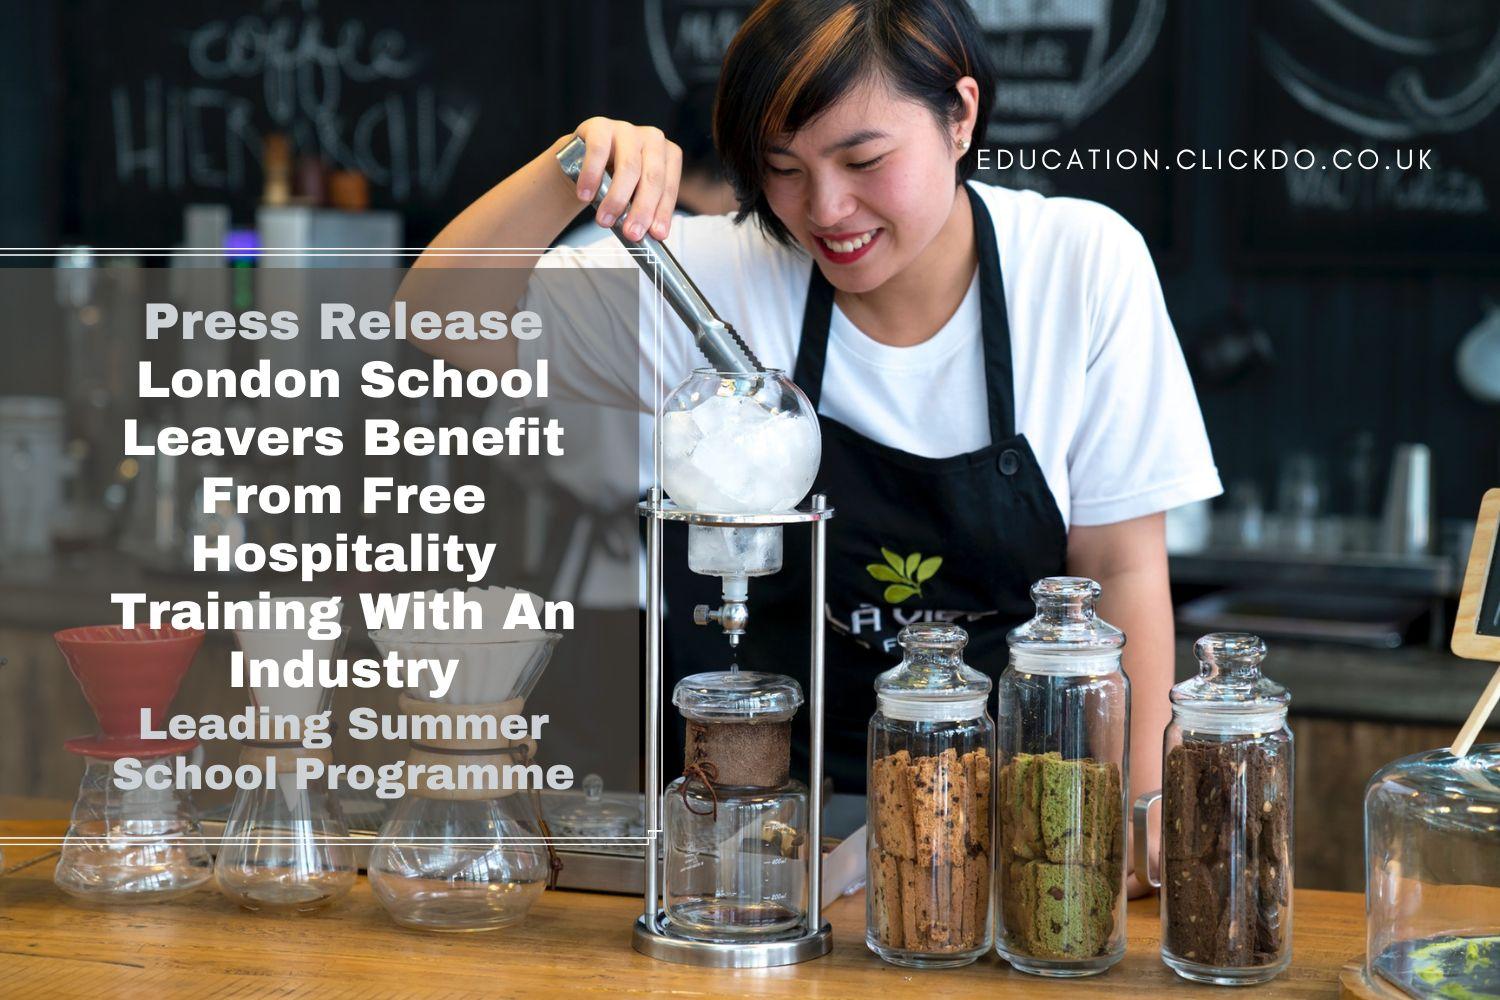 Press Release London School Leavers Benefit From Free Hospitality Training With An Industry-Leading Summer School Programme – education clickdo